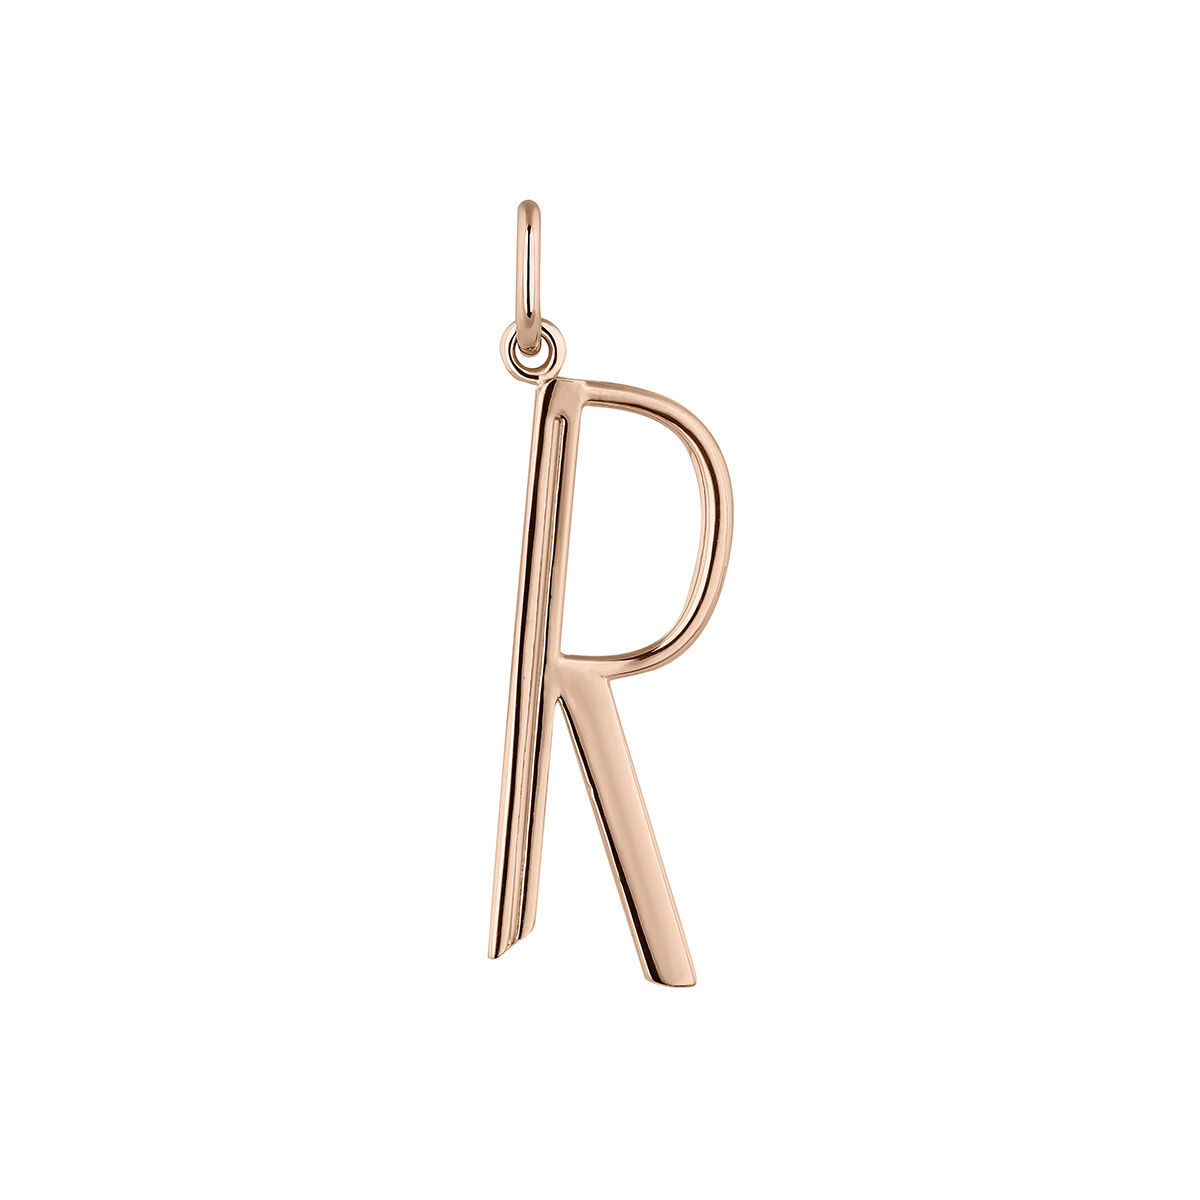 Large rose gold-plated silver R initial charm  , J04642-03-R, hi-res